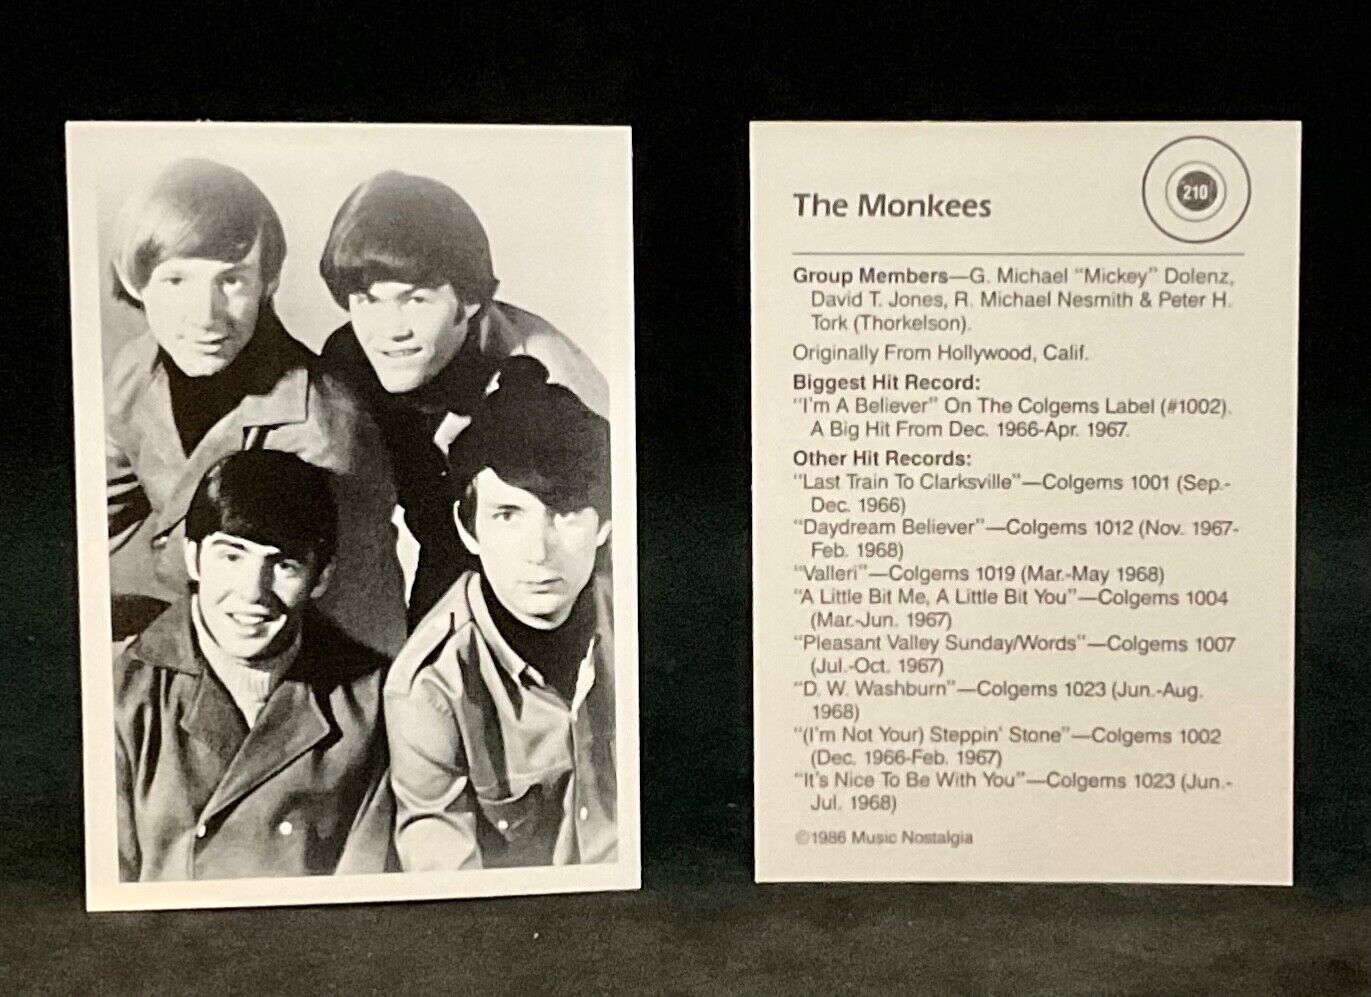 The Monkees 1986 Music Nostalgia Trading Card #210 (NM-MT)